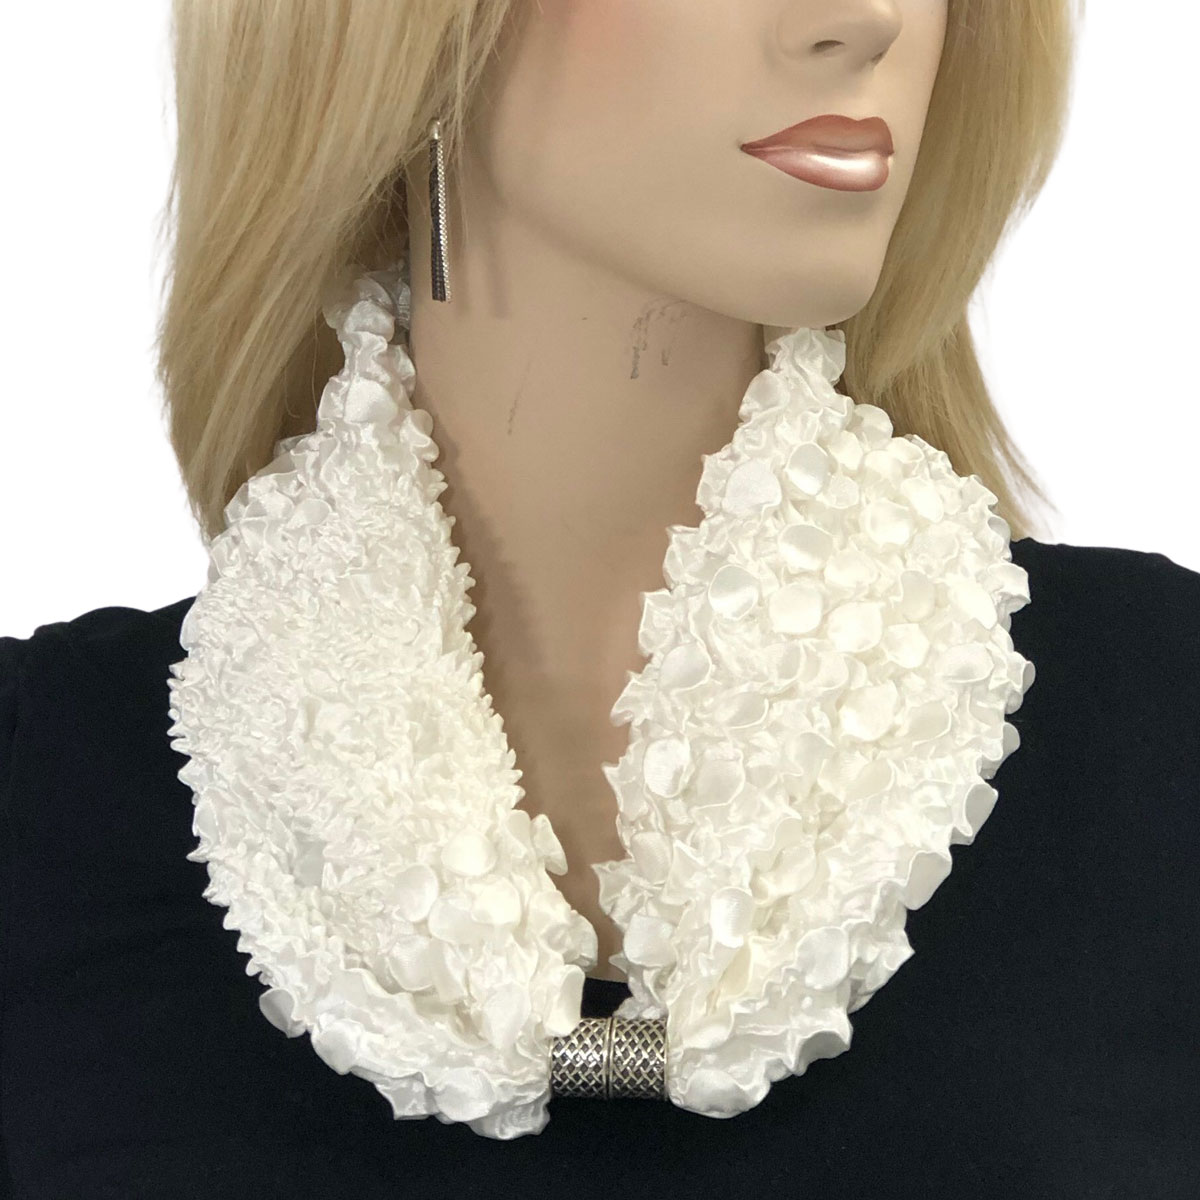 Magnetic Clasp Scarves - Coin + Bubble Satin 3302 WHITE Magnetic Clasp Scarf - Bubble Satin - 